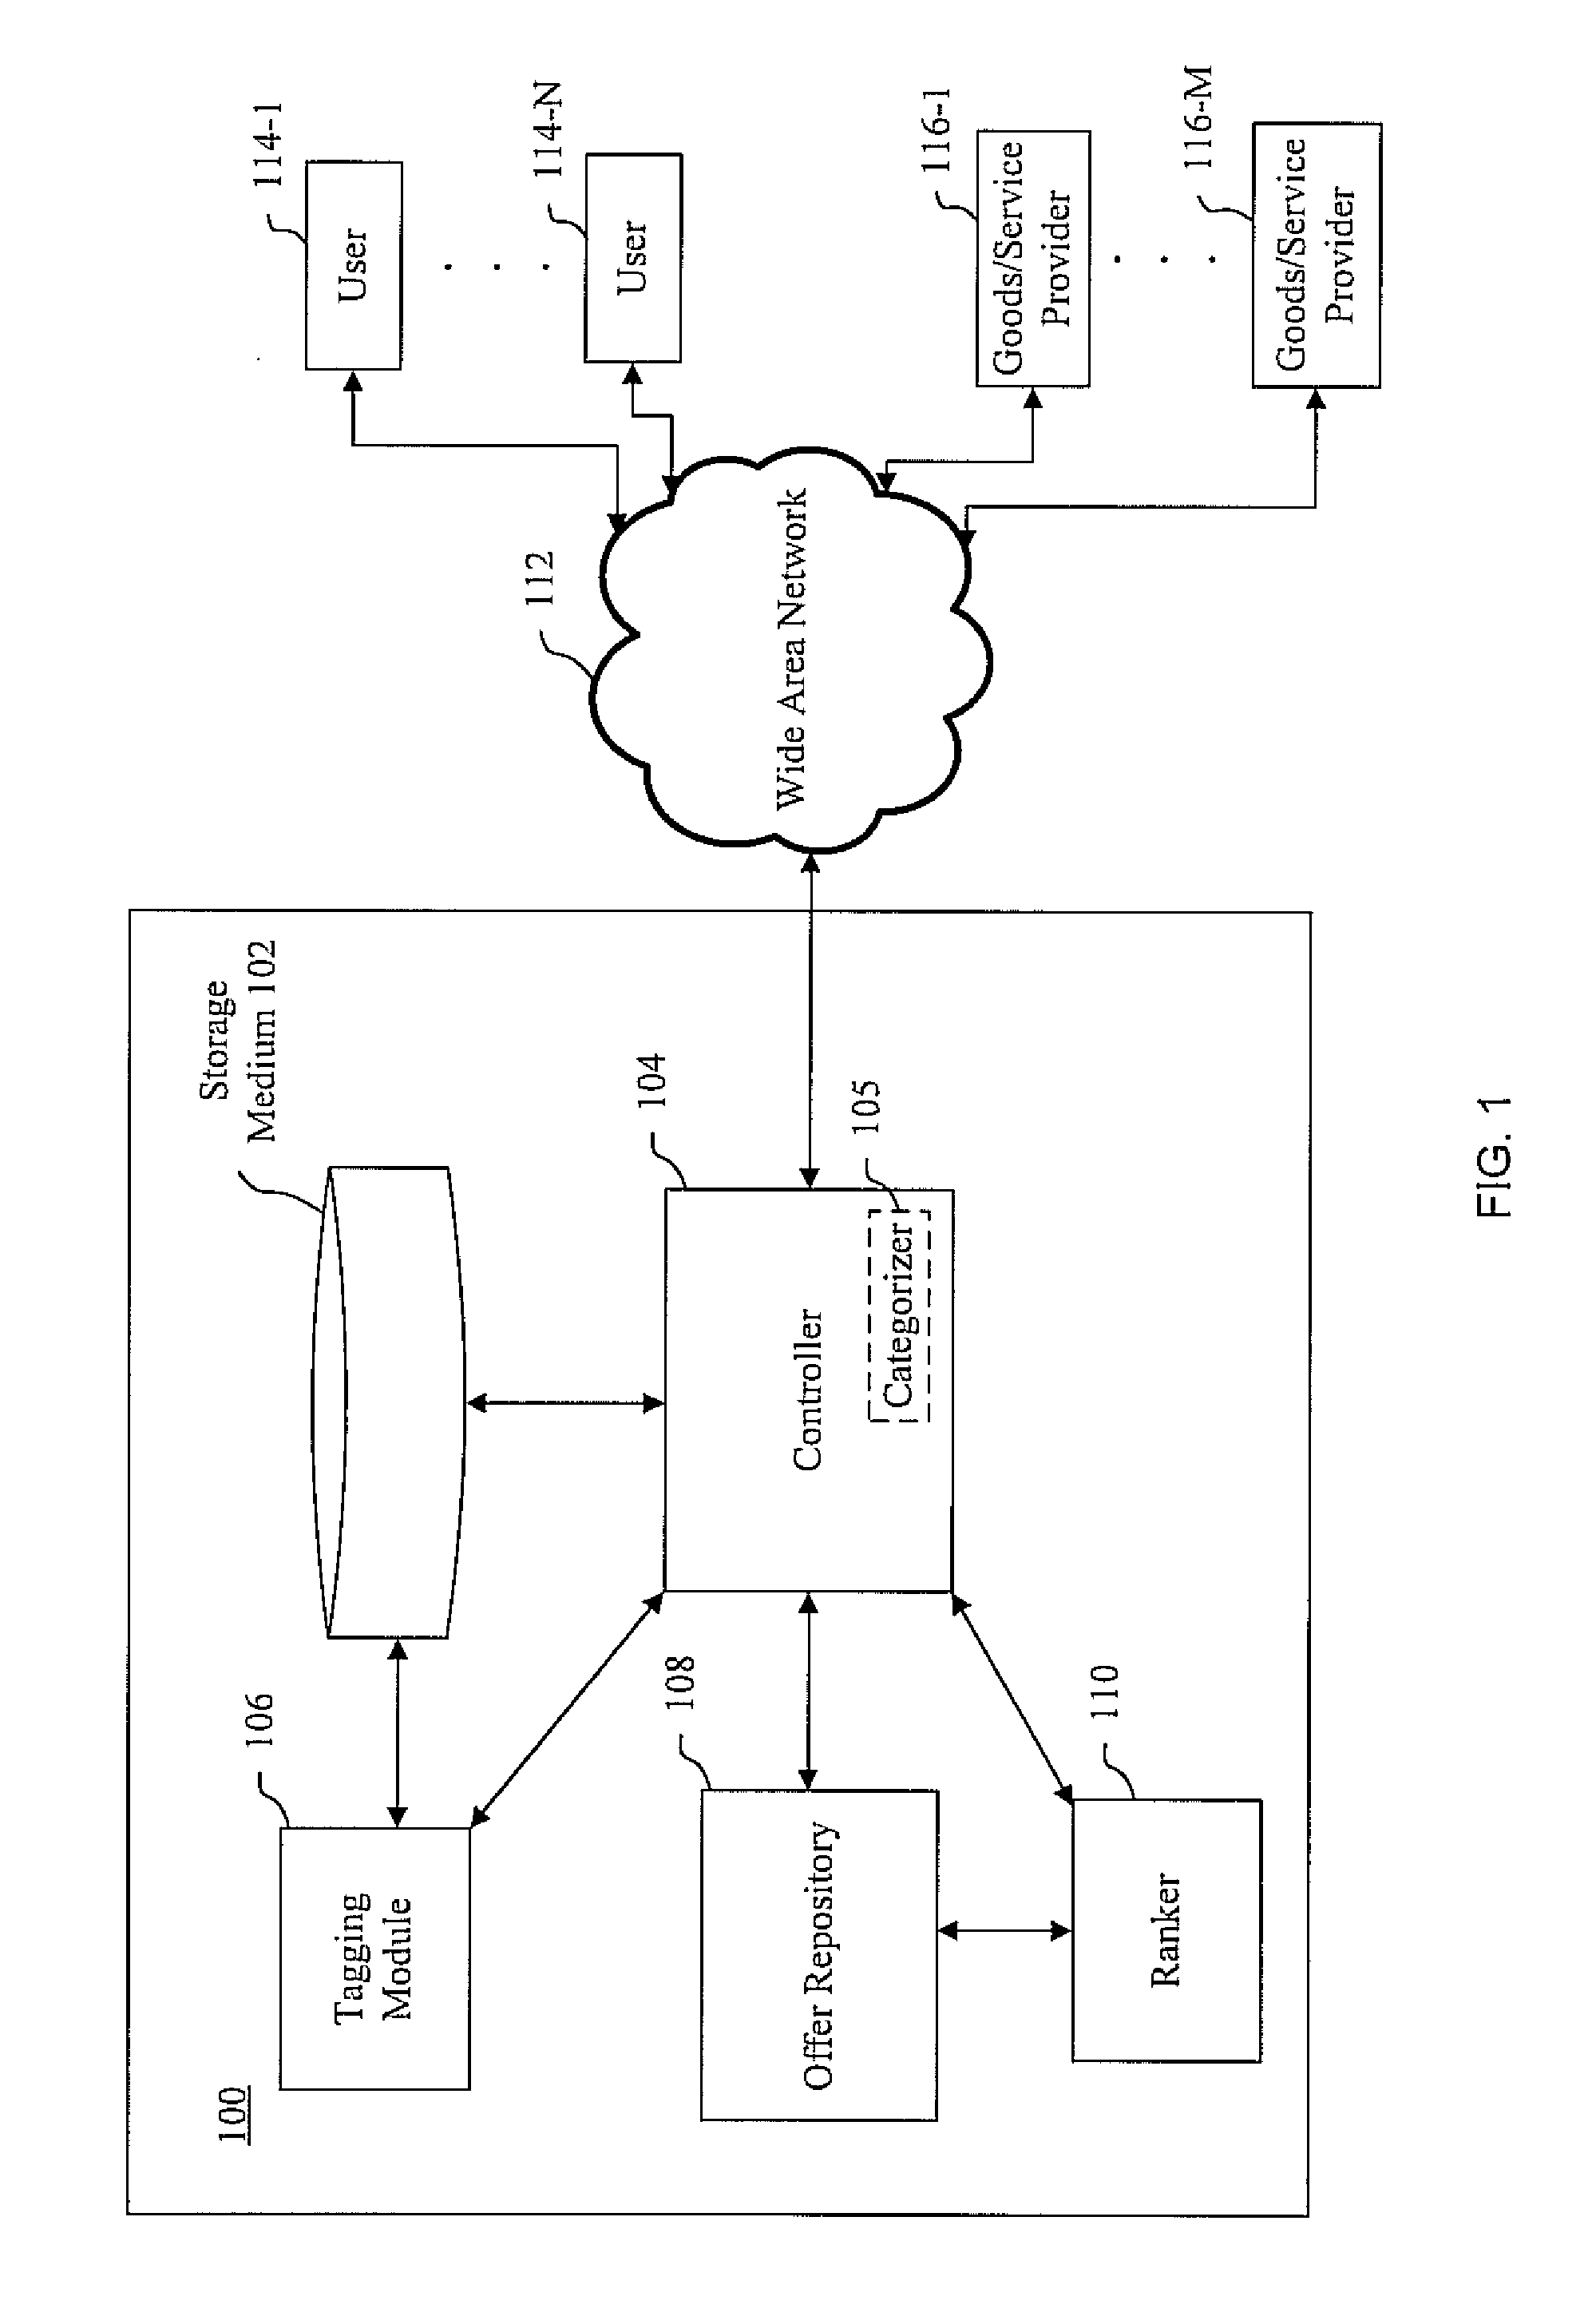 Structured analysis and organization of documents online and related methods